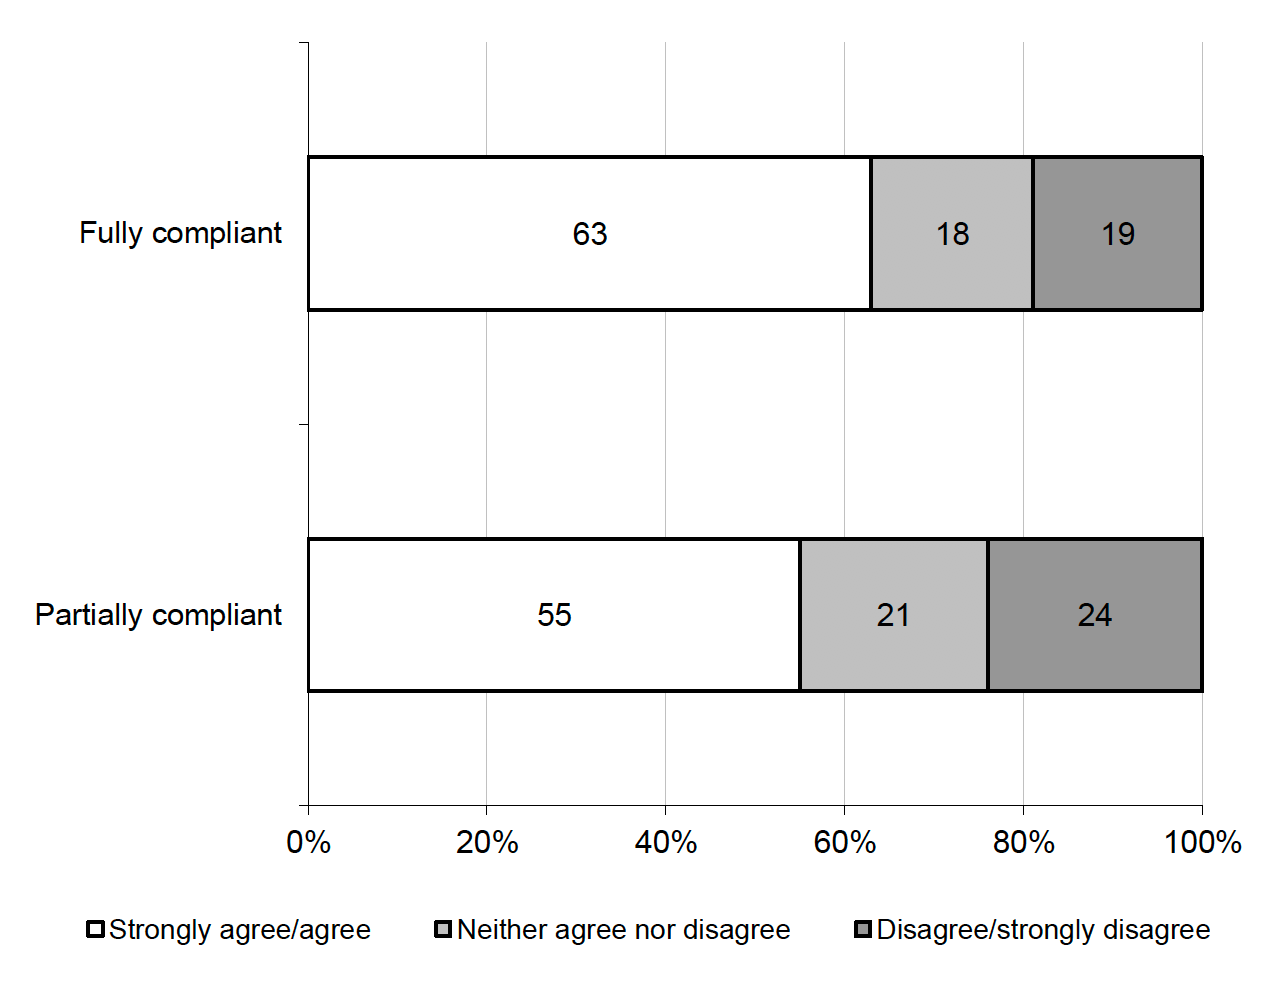 Figure 3.7 Behavioural compliance by agreement or disagreement with ‘International travel restrictions will help reduce the spread of COVID-19 and new variants of it’ by observed compliance (% All International Traveller participants) 
63% of International Travellers who were fully compliant on the behavioural measure agreed compared with 55% of those who were partially compliant 
